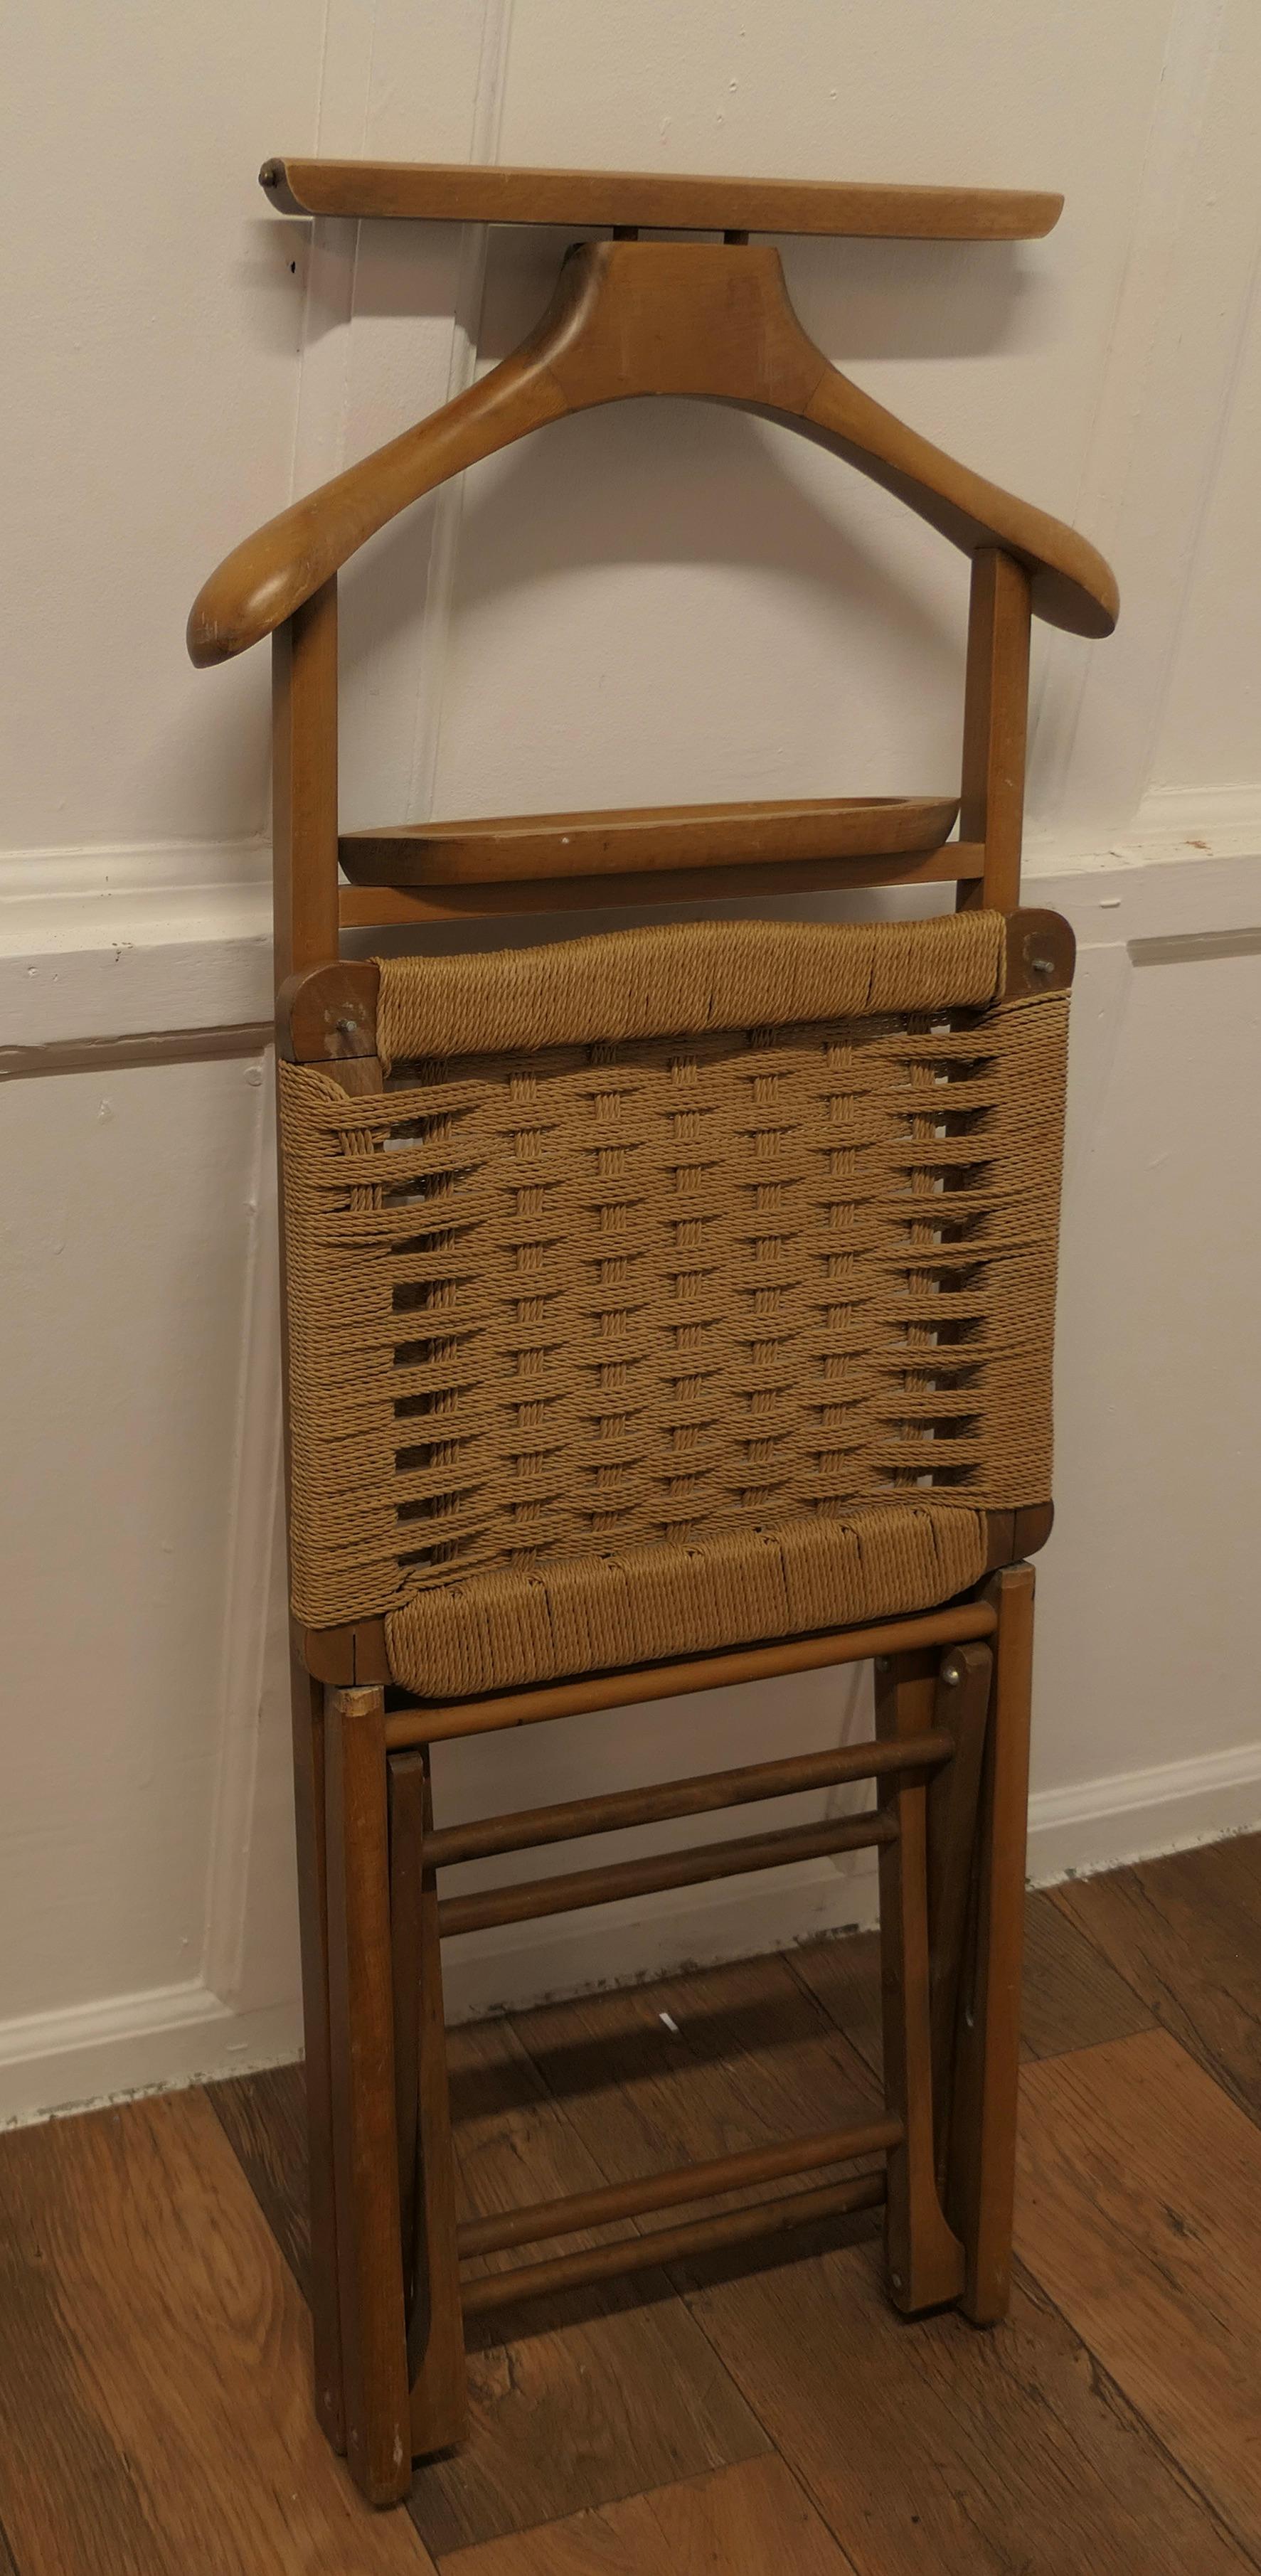 Midcentury Italian Gentleman’s Floor Standing Valet Luggage Rack.


A very useful piece, the Valet or clothes stand/Luggage rack is made in beech with a Woven Seagrass Seat which doubles up as a Luggage Rack with a coat hanger an trouser